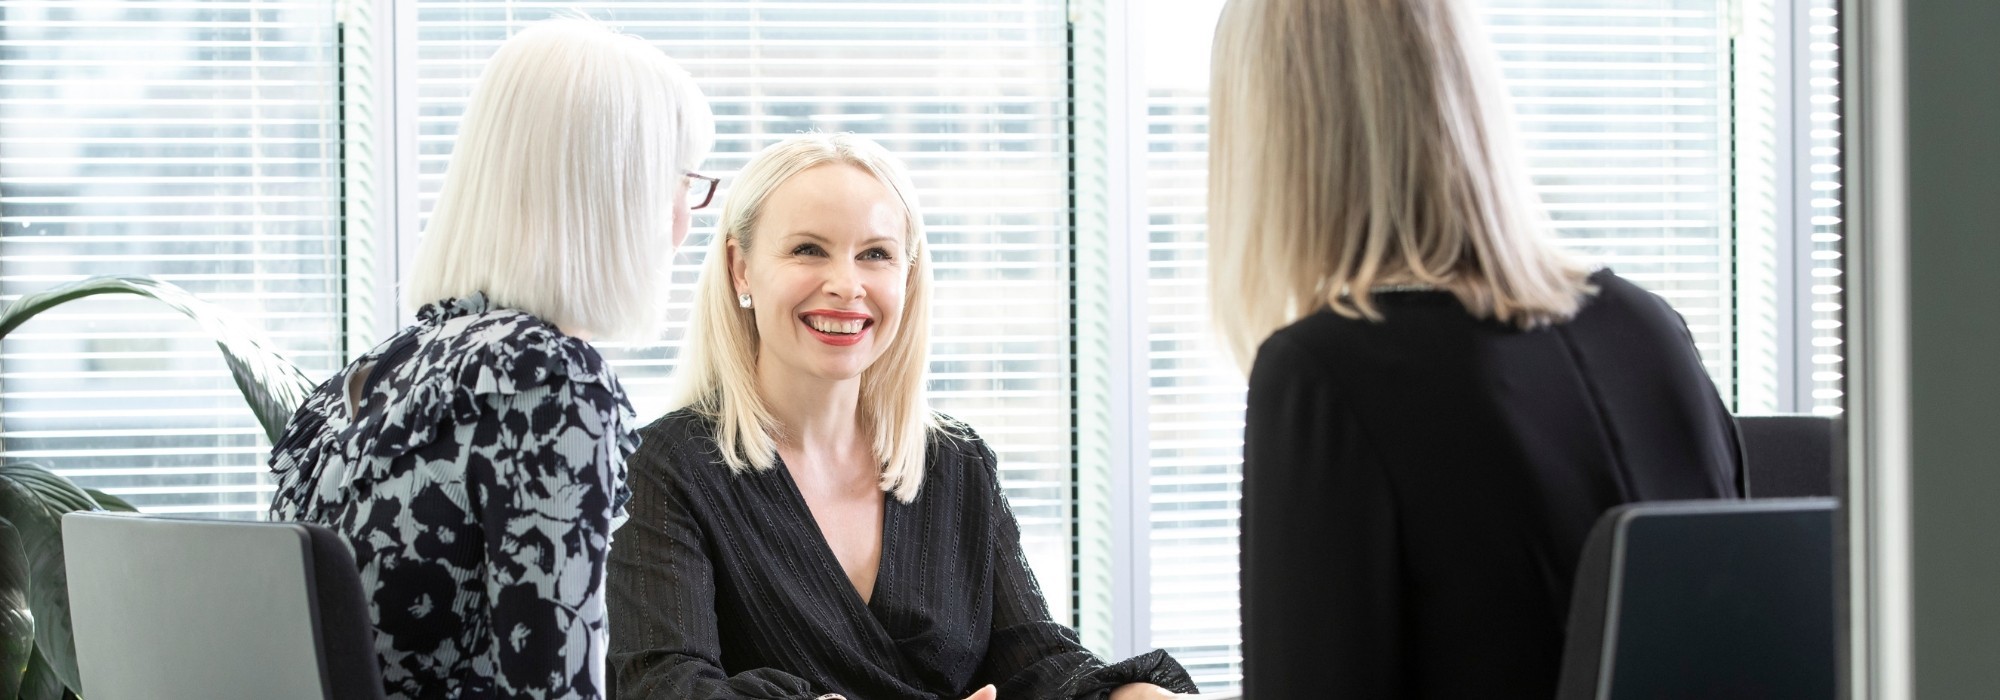 Recruitment Manager smiling in meeting